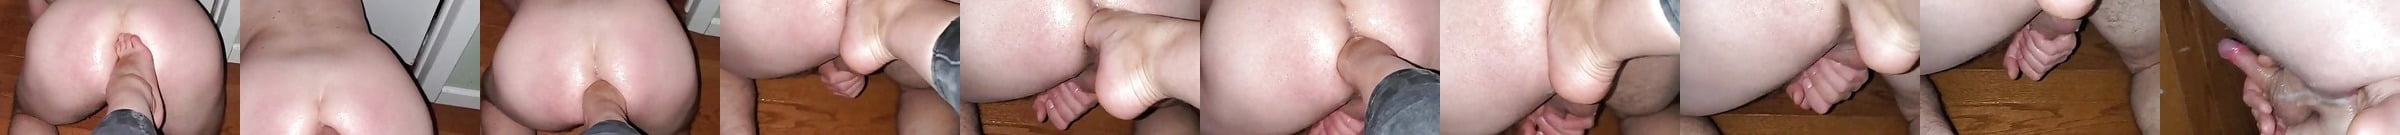 Featured Ass Fisting Slave Porn Videos Xhamster